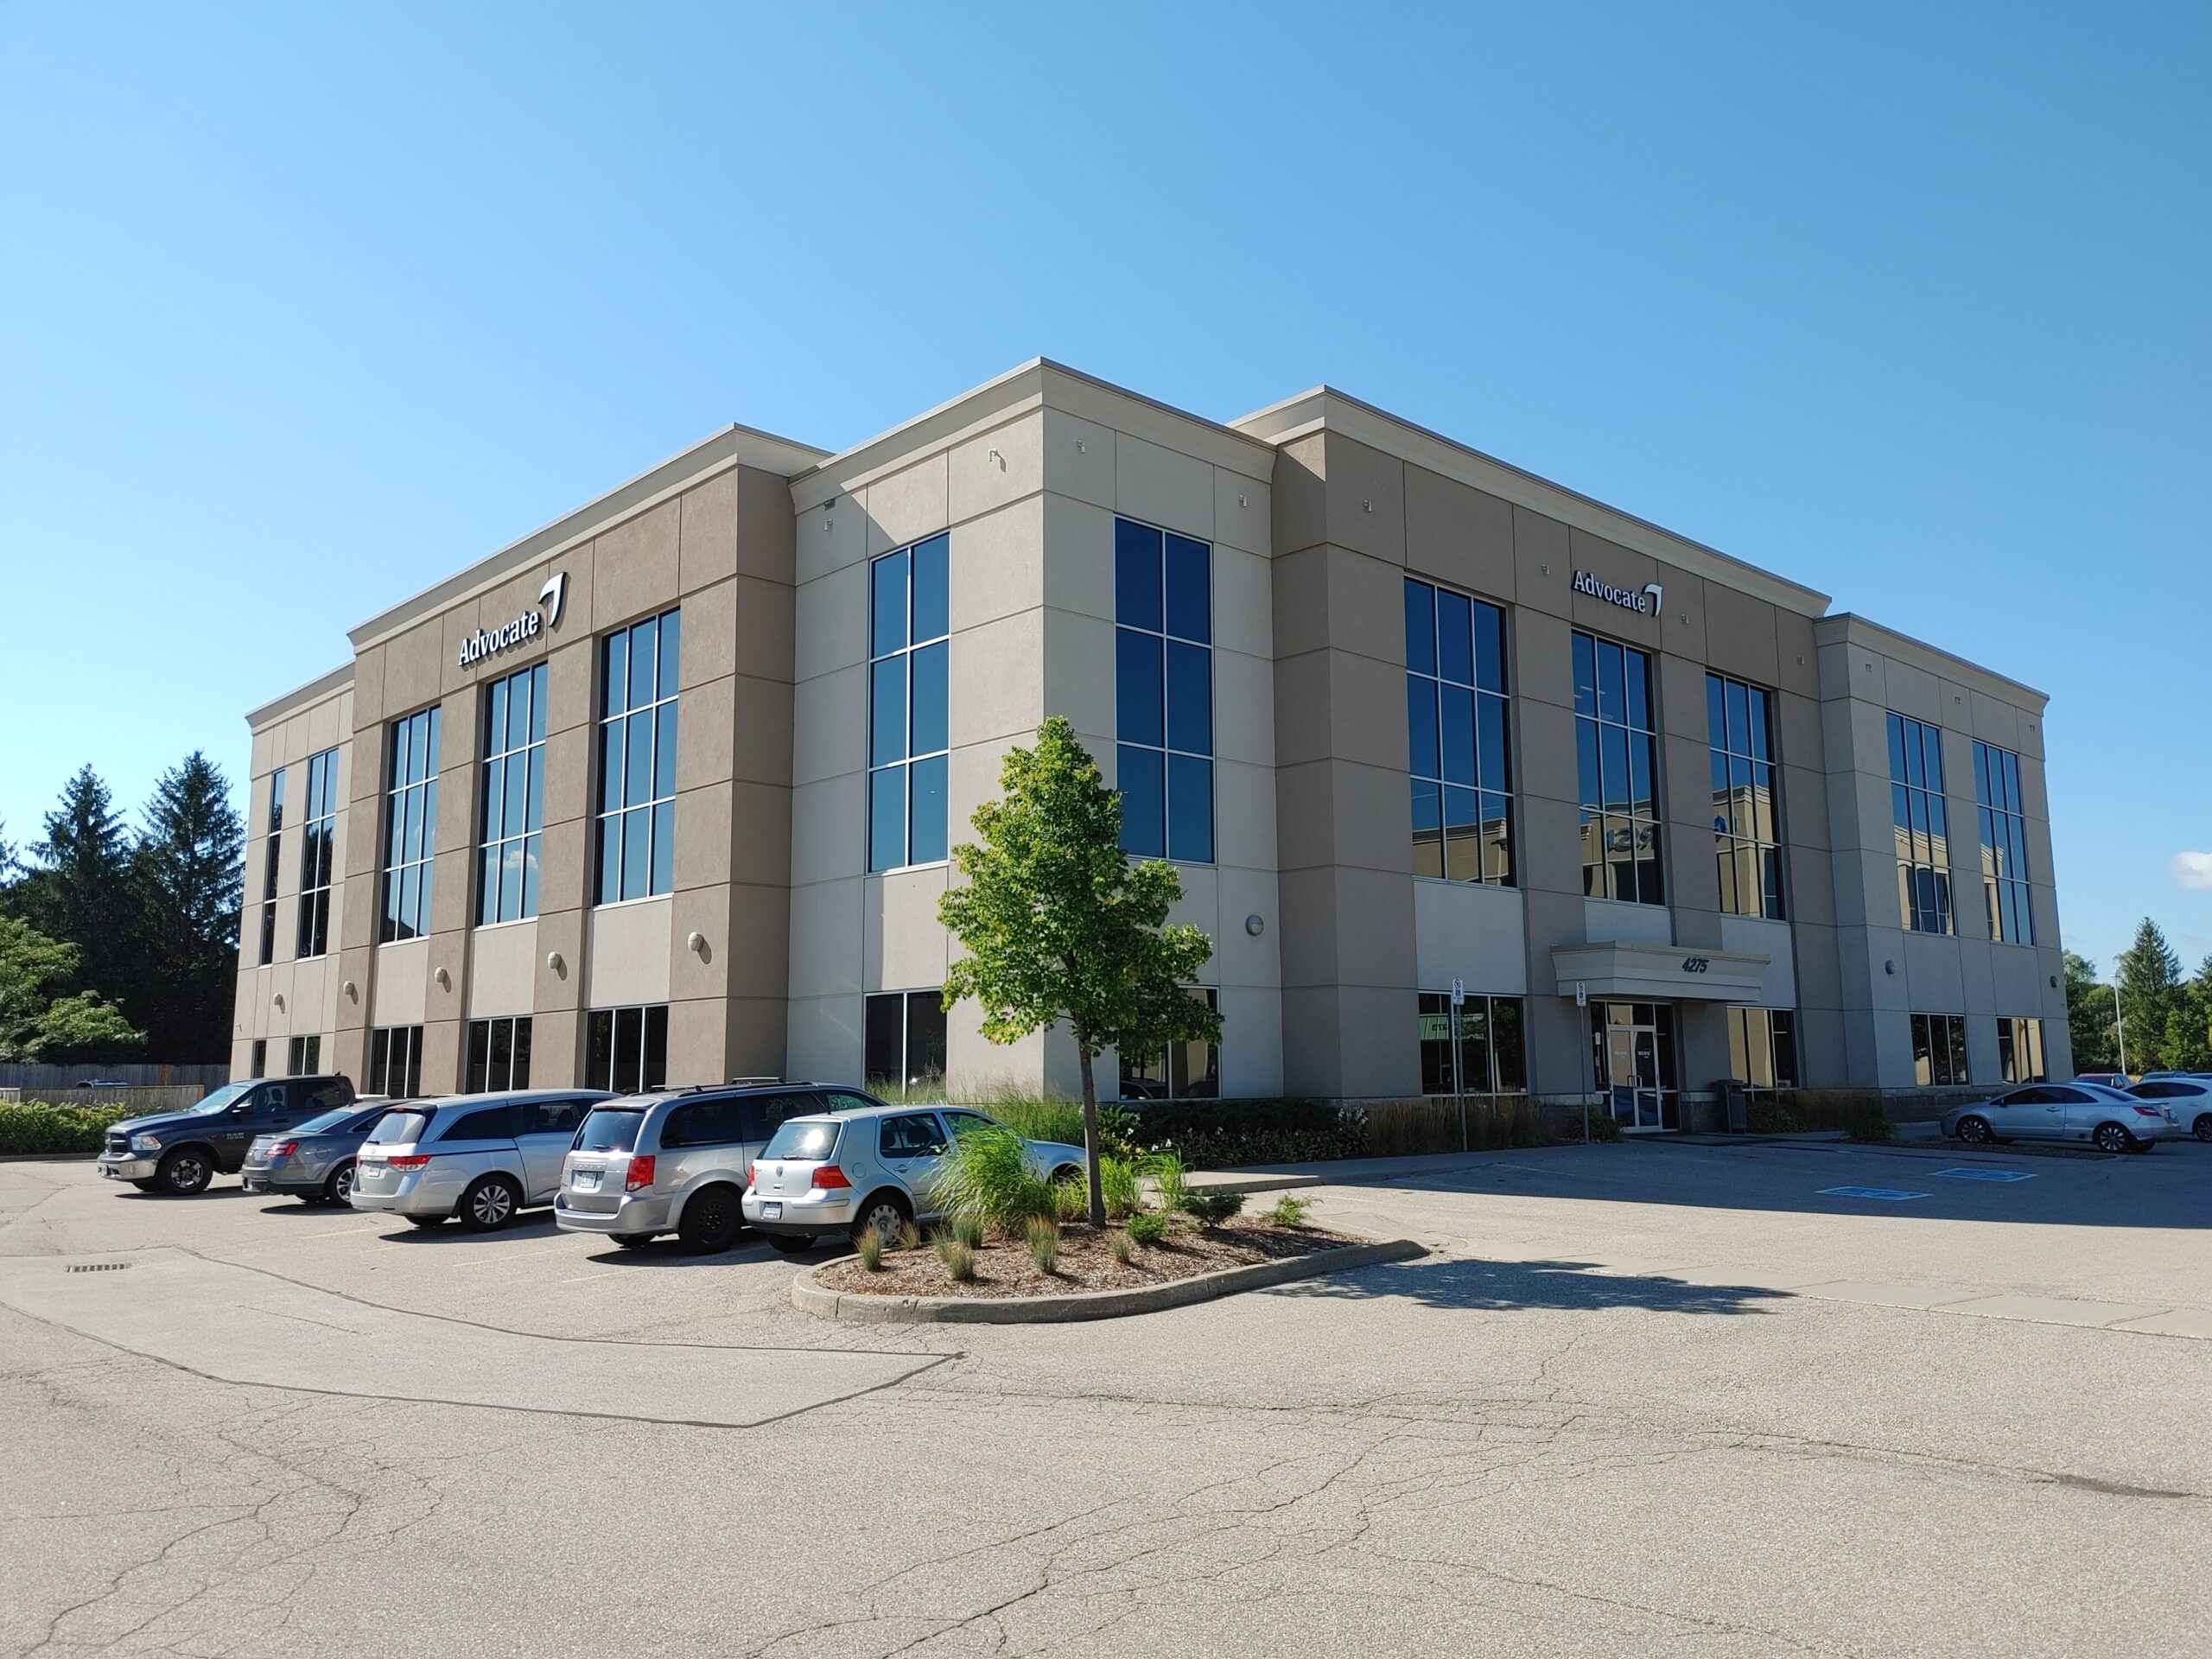 4275 King Street East, Kitchener | Office Space For Lease